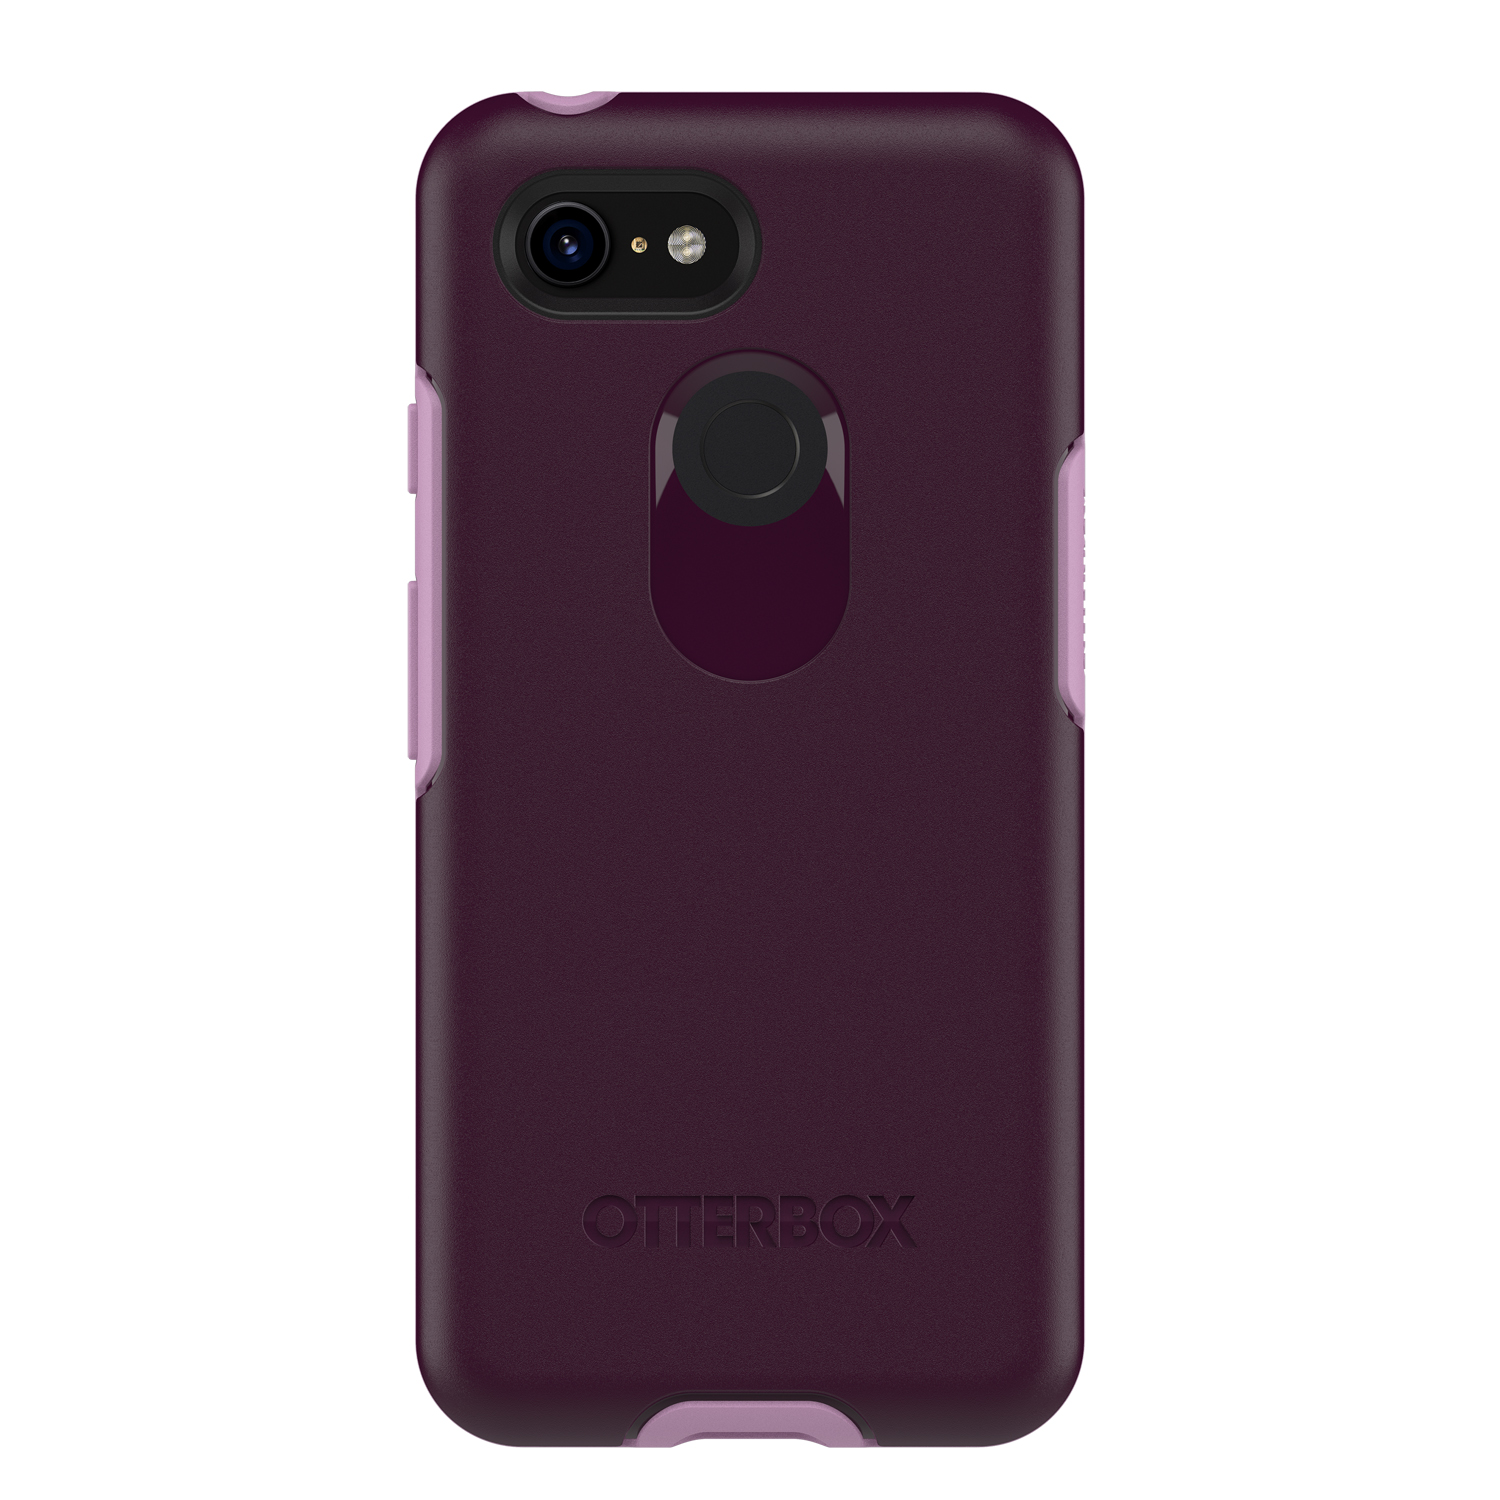 Otterbox Symmetry Series Case for Google Pixel 3, Tonic Violet - image 1 of 6